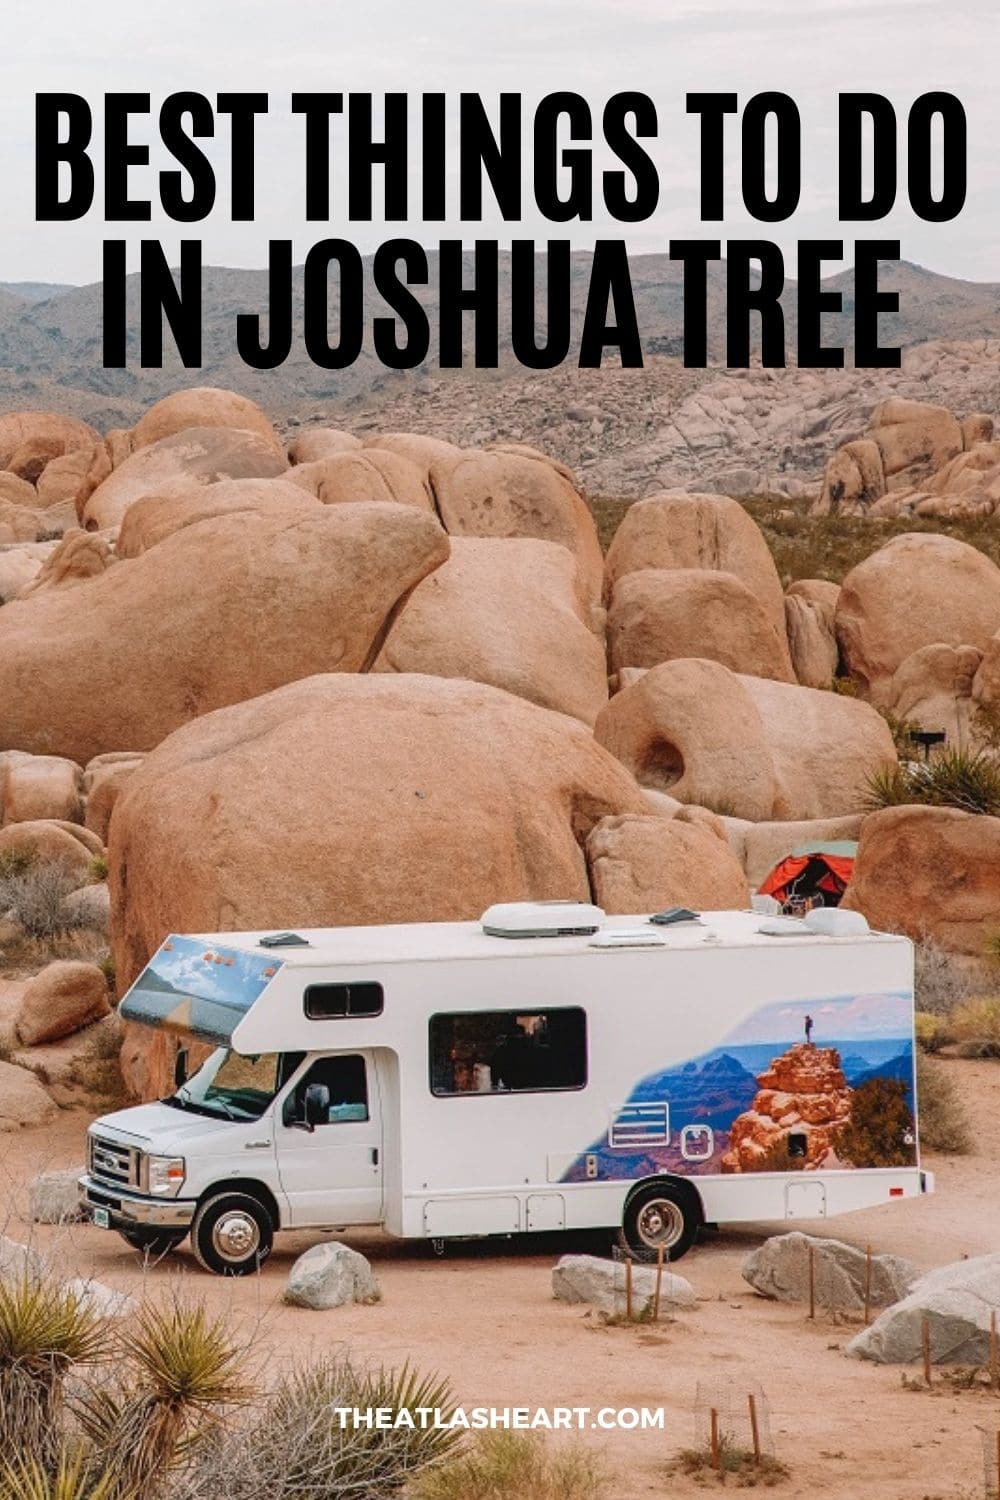 45 Fun & Best Things to do in Joshua Tree to Get the Most Out of Your Desert Escape